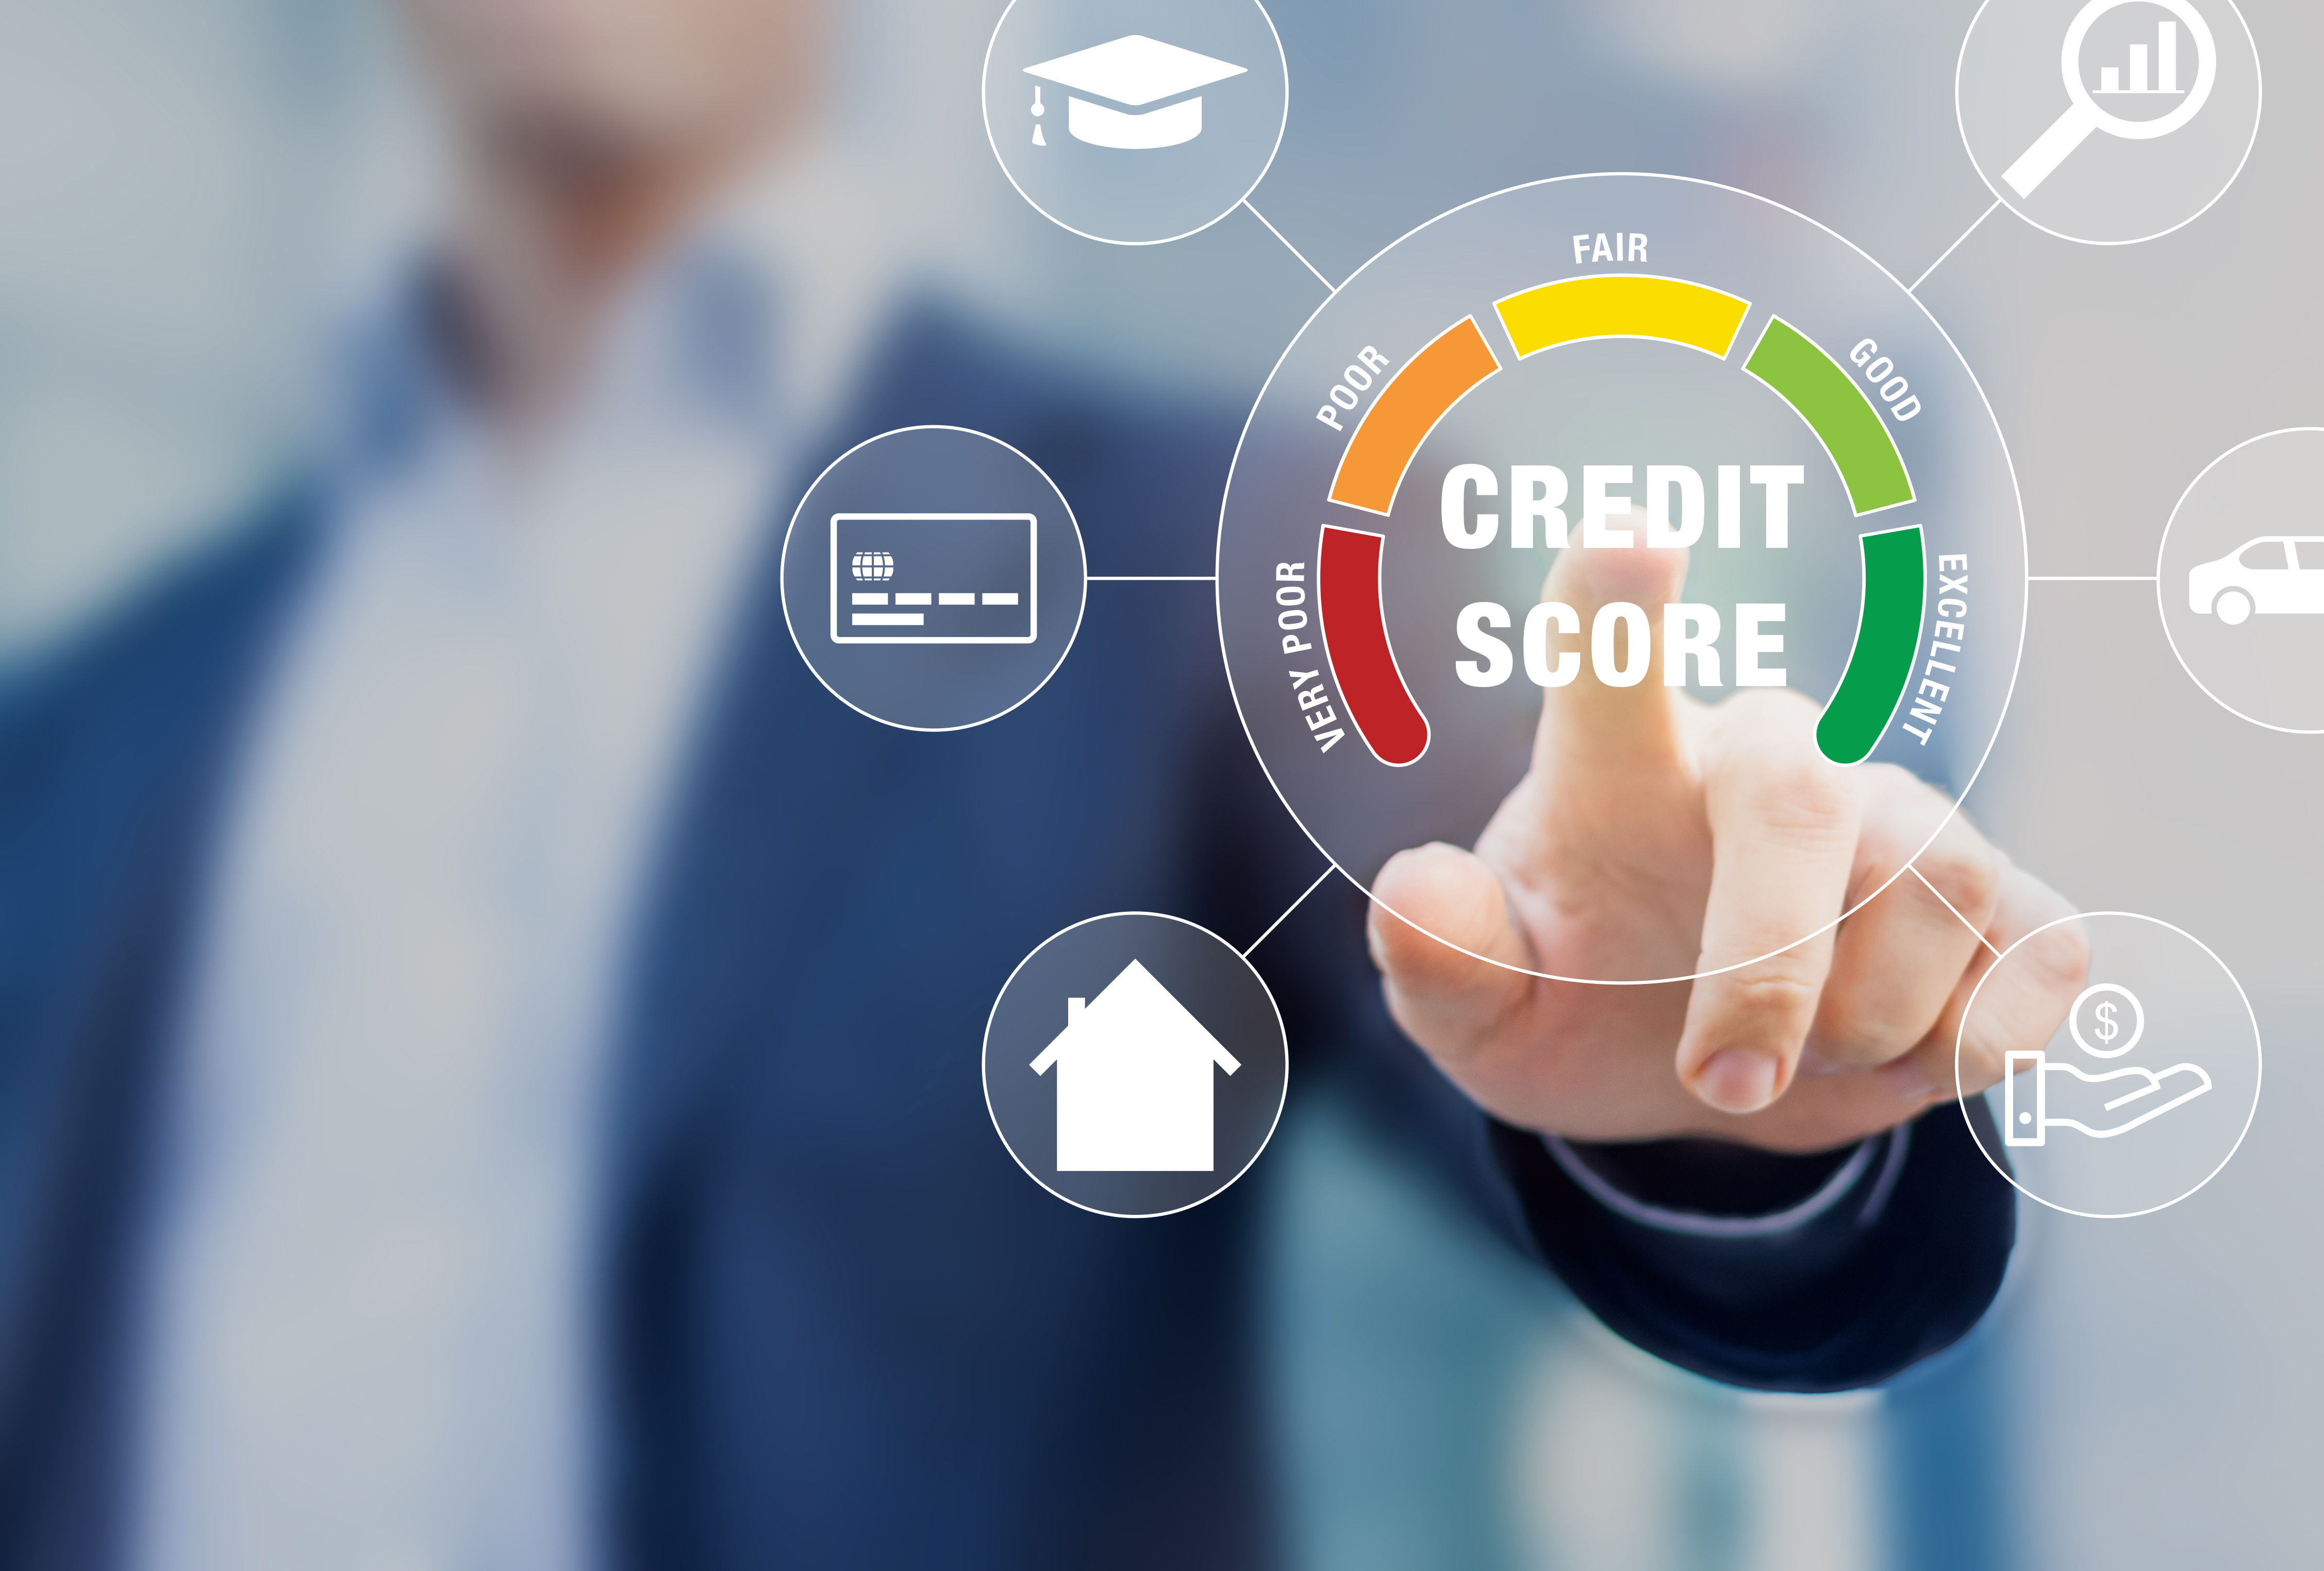 Learn what is considered for your credit score! Source: Adobe Stock.